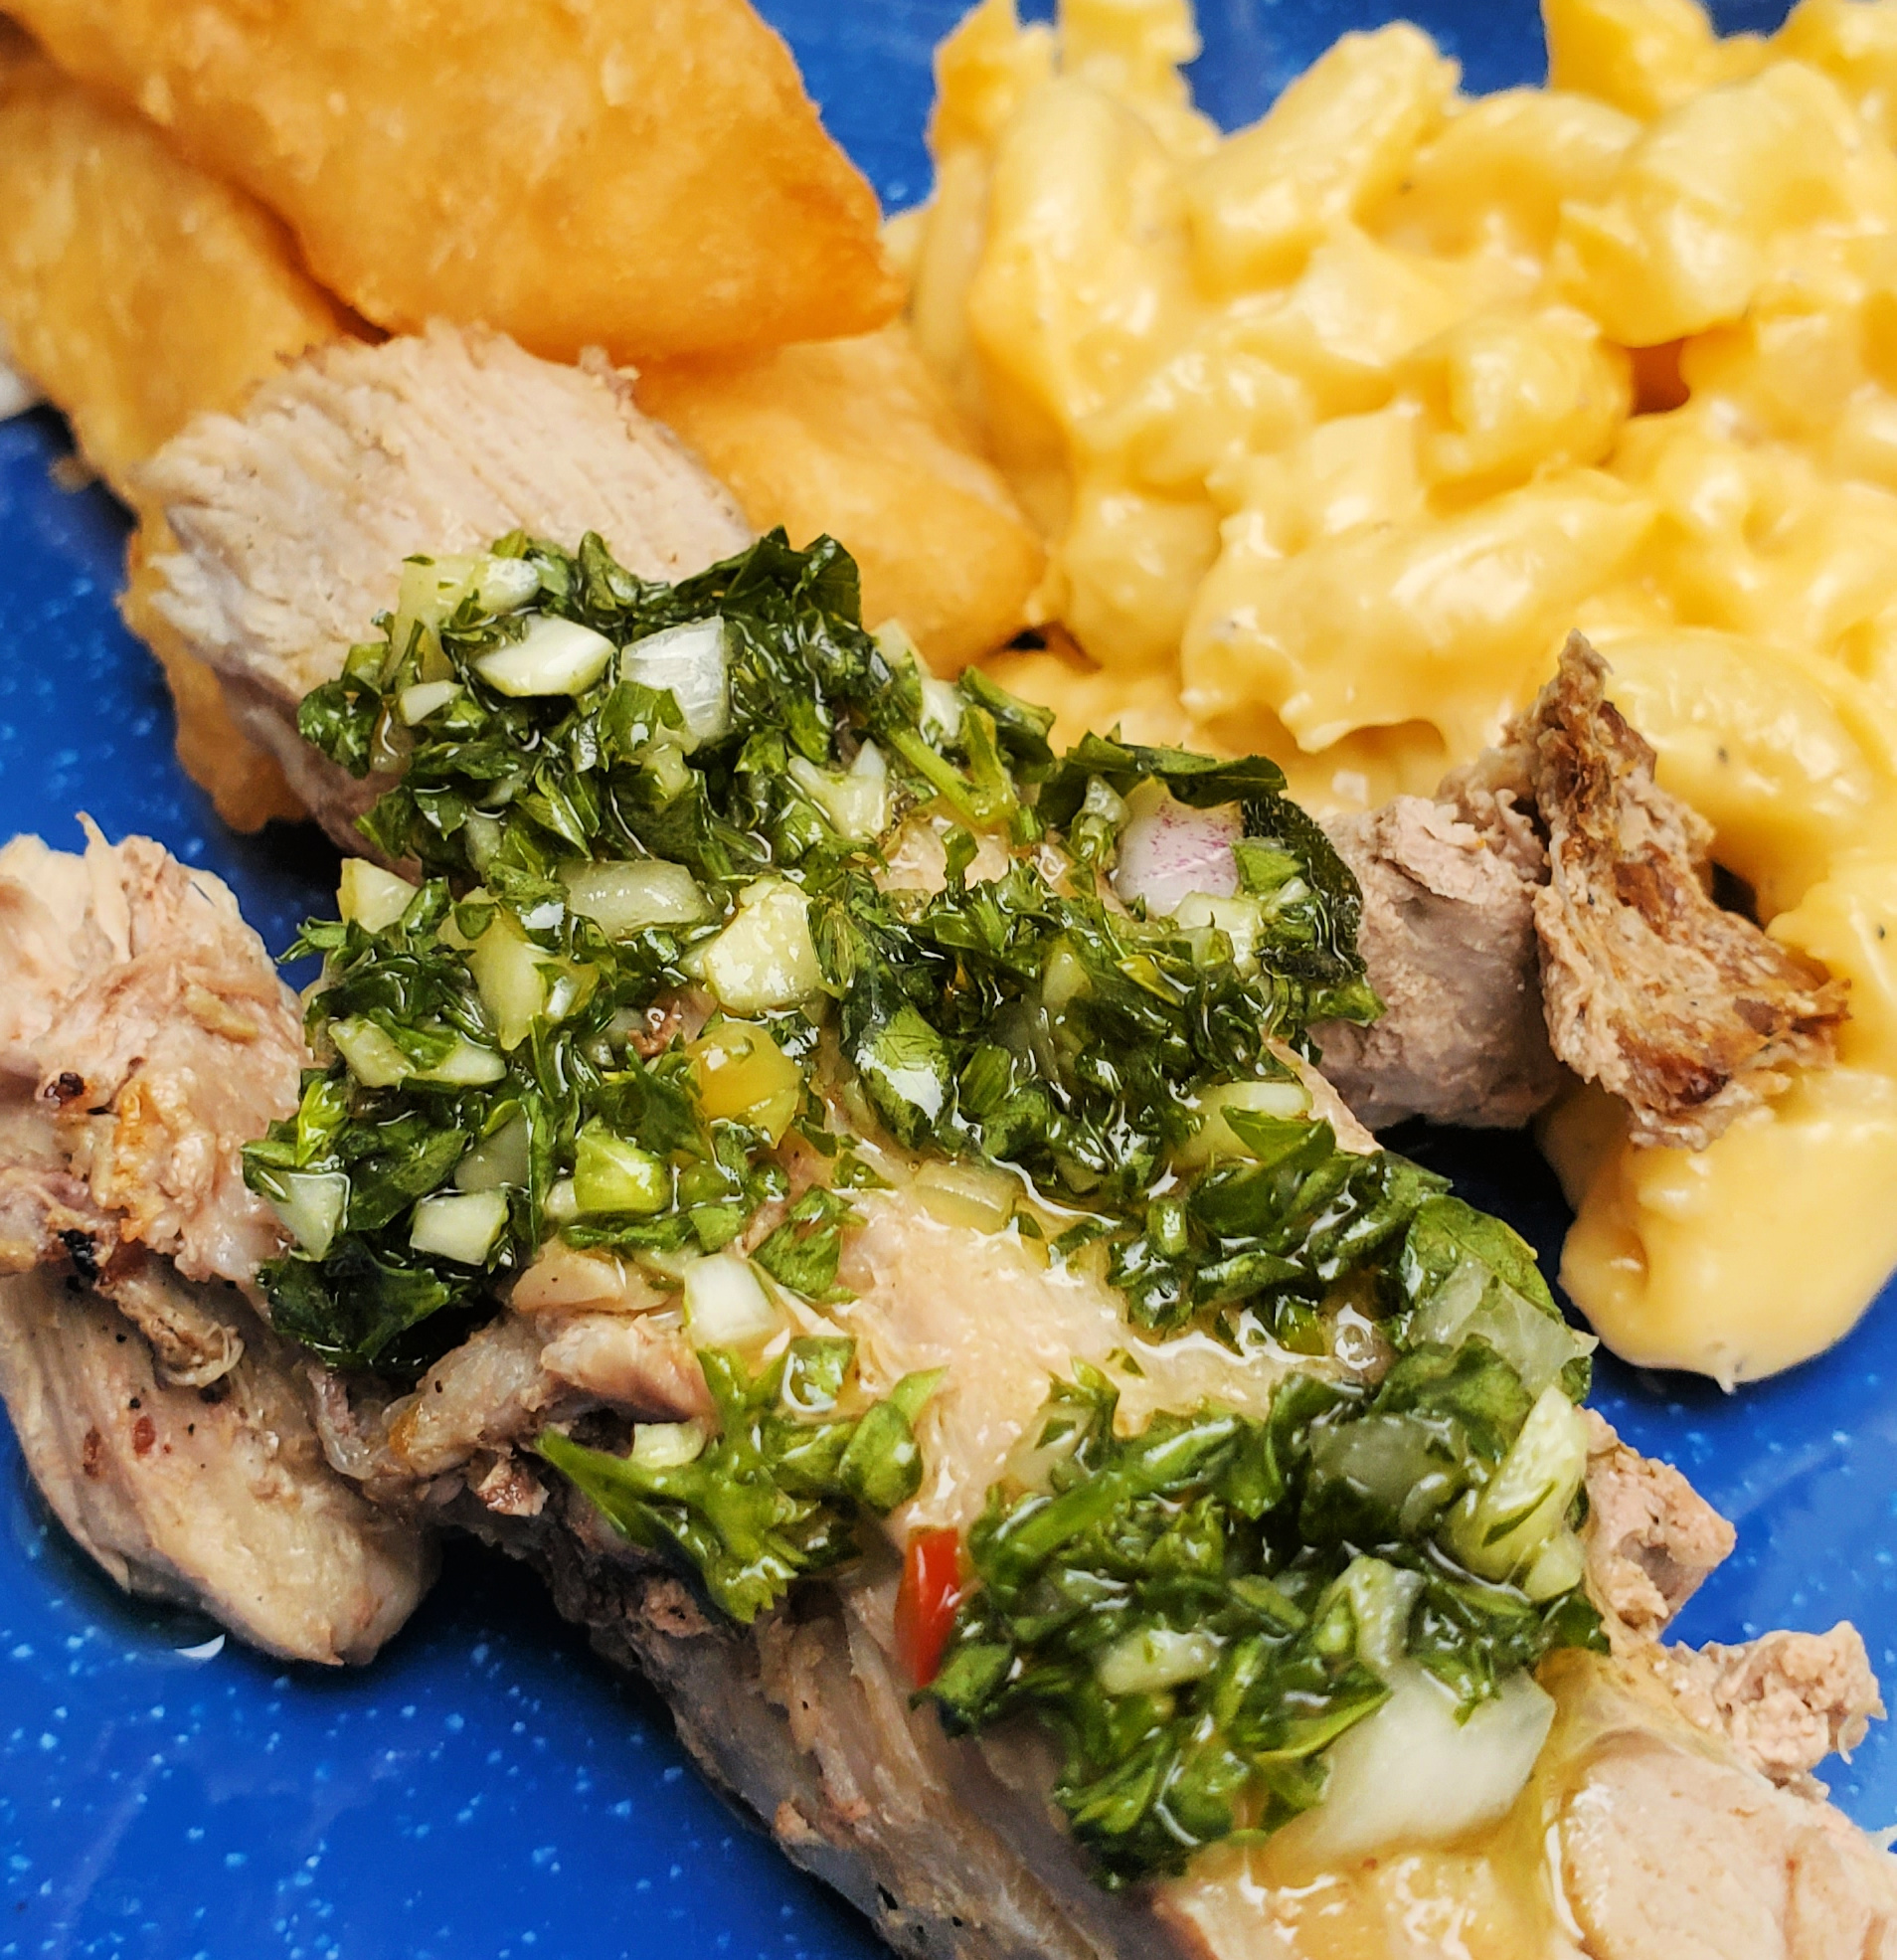 Blue plate with roasted pork and chimichurri, fried yucca, and mac & cheese